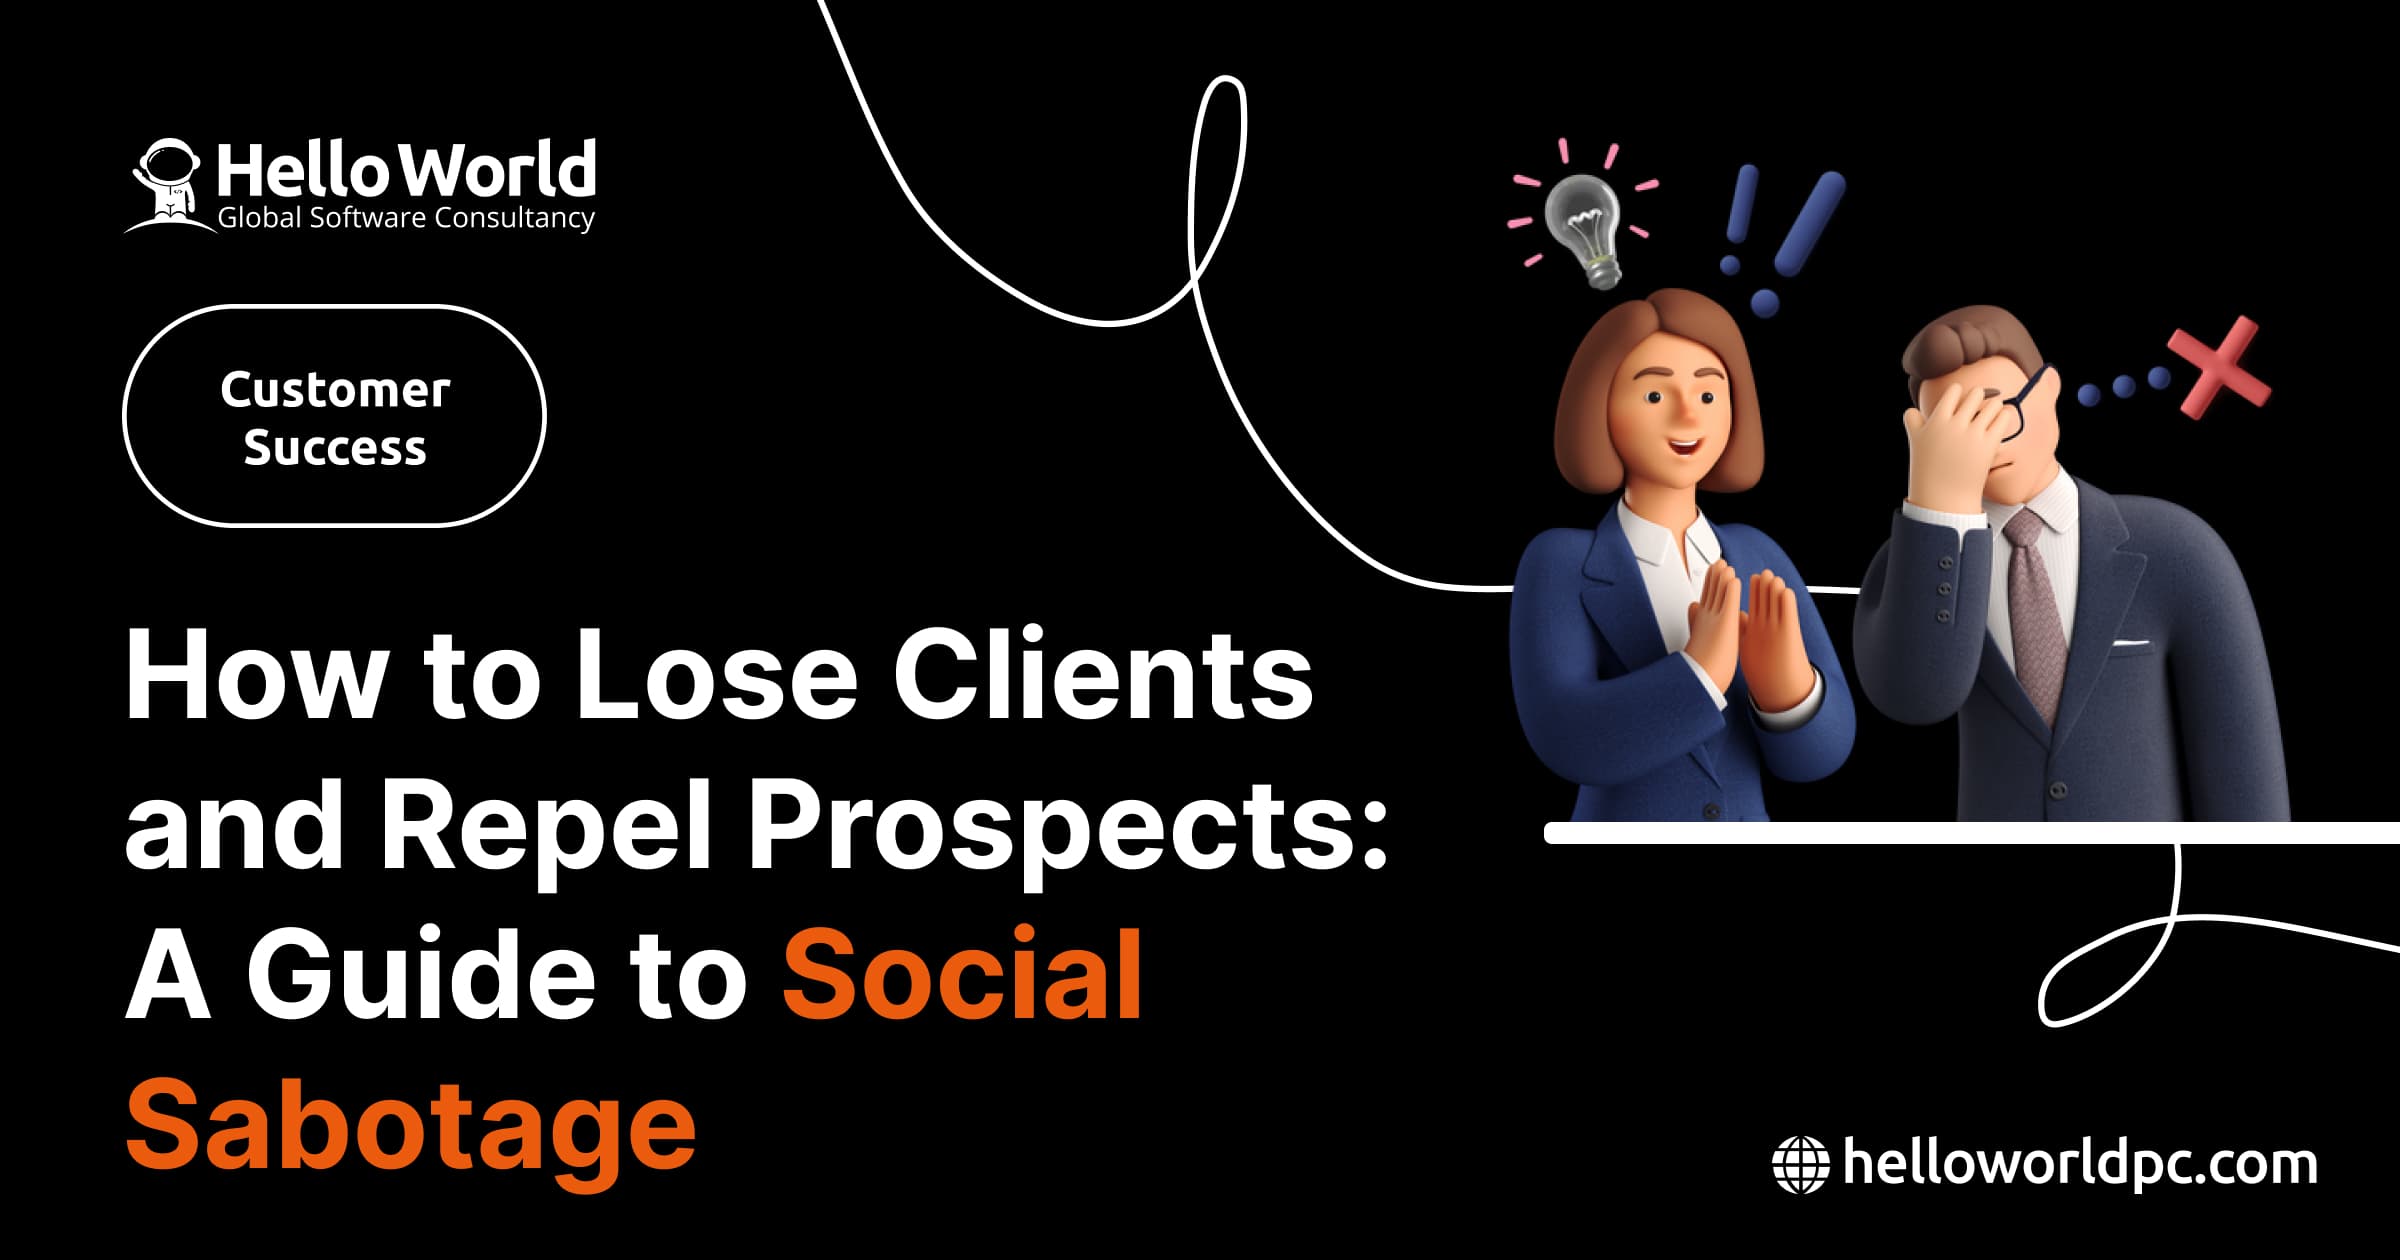 How to Lose Clients and Repel Prospects: A Guide to Social Sabotage